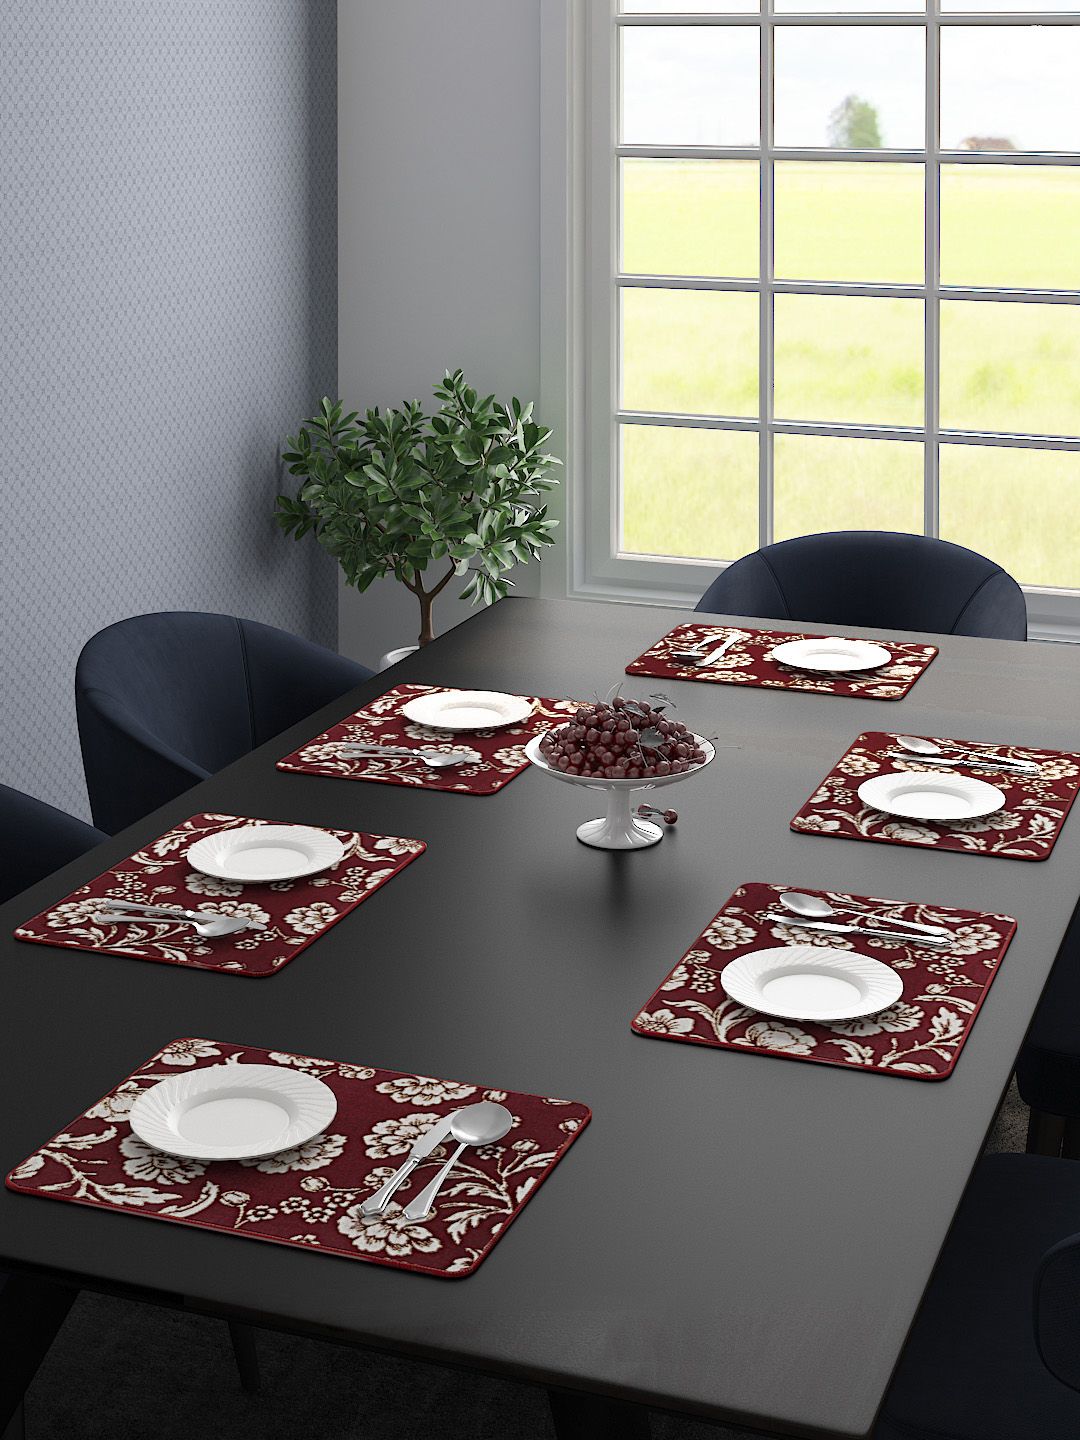 Saral Home Set of 6 Maroon Printed Table Placemats Price in India